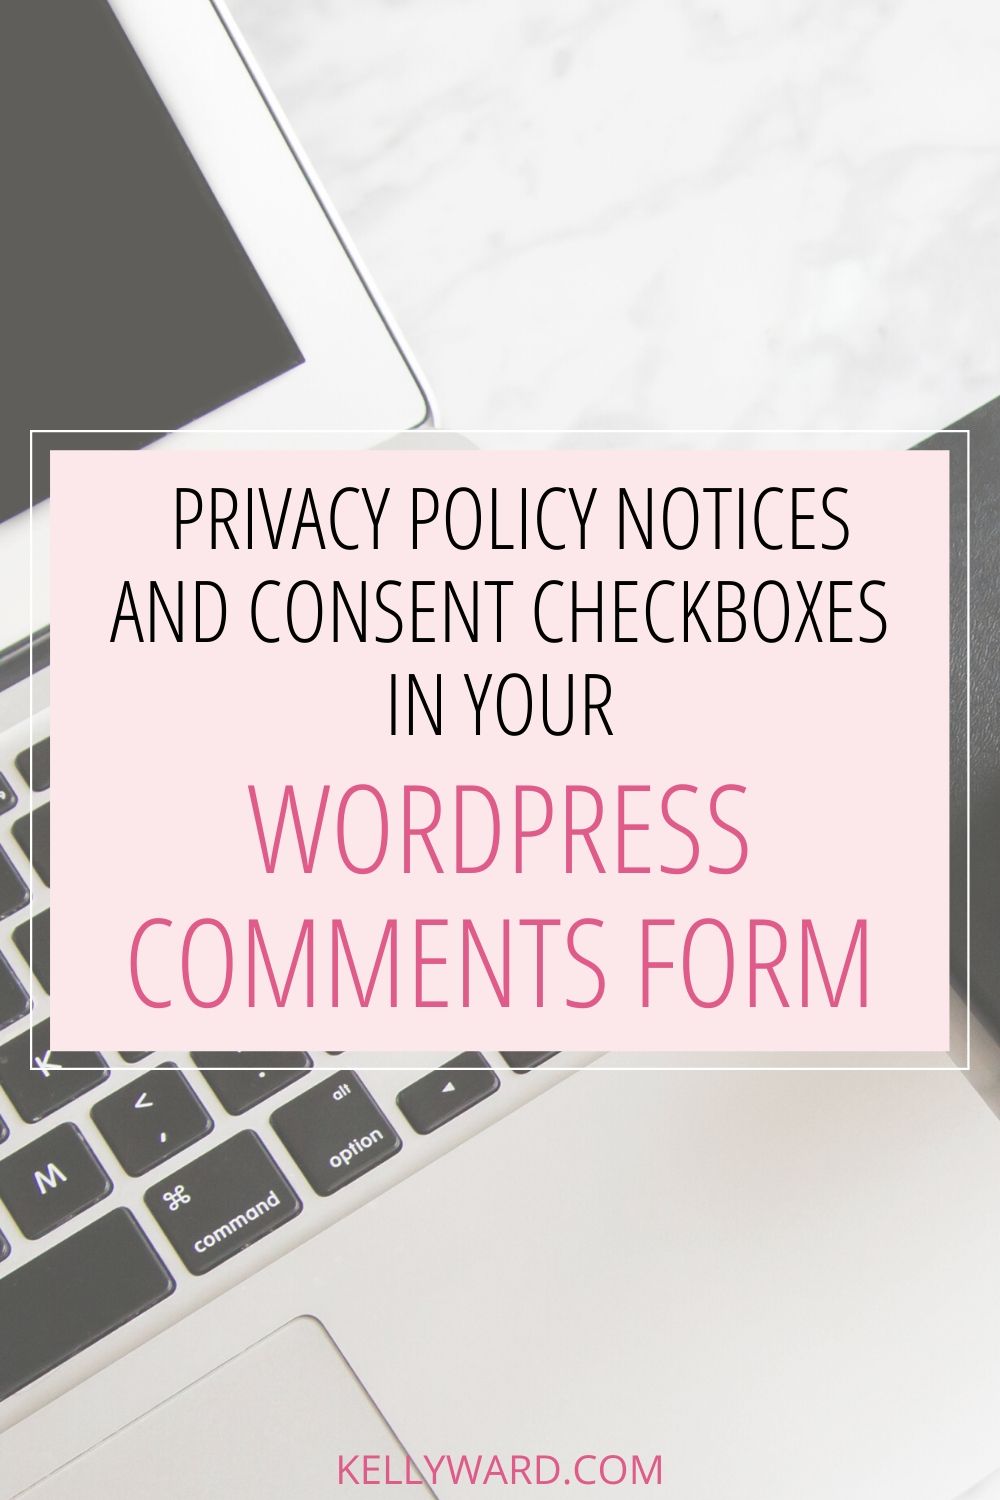 How to Add Privacy Policy Notices and Consent Checkboxes in your WordPress Comments Form